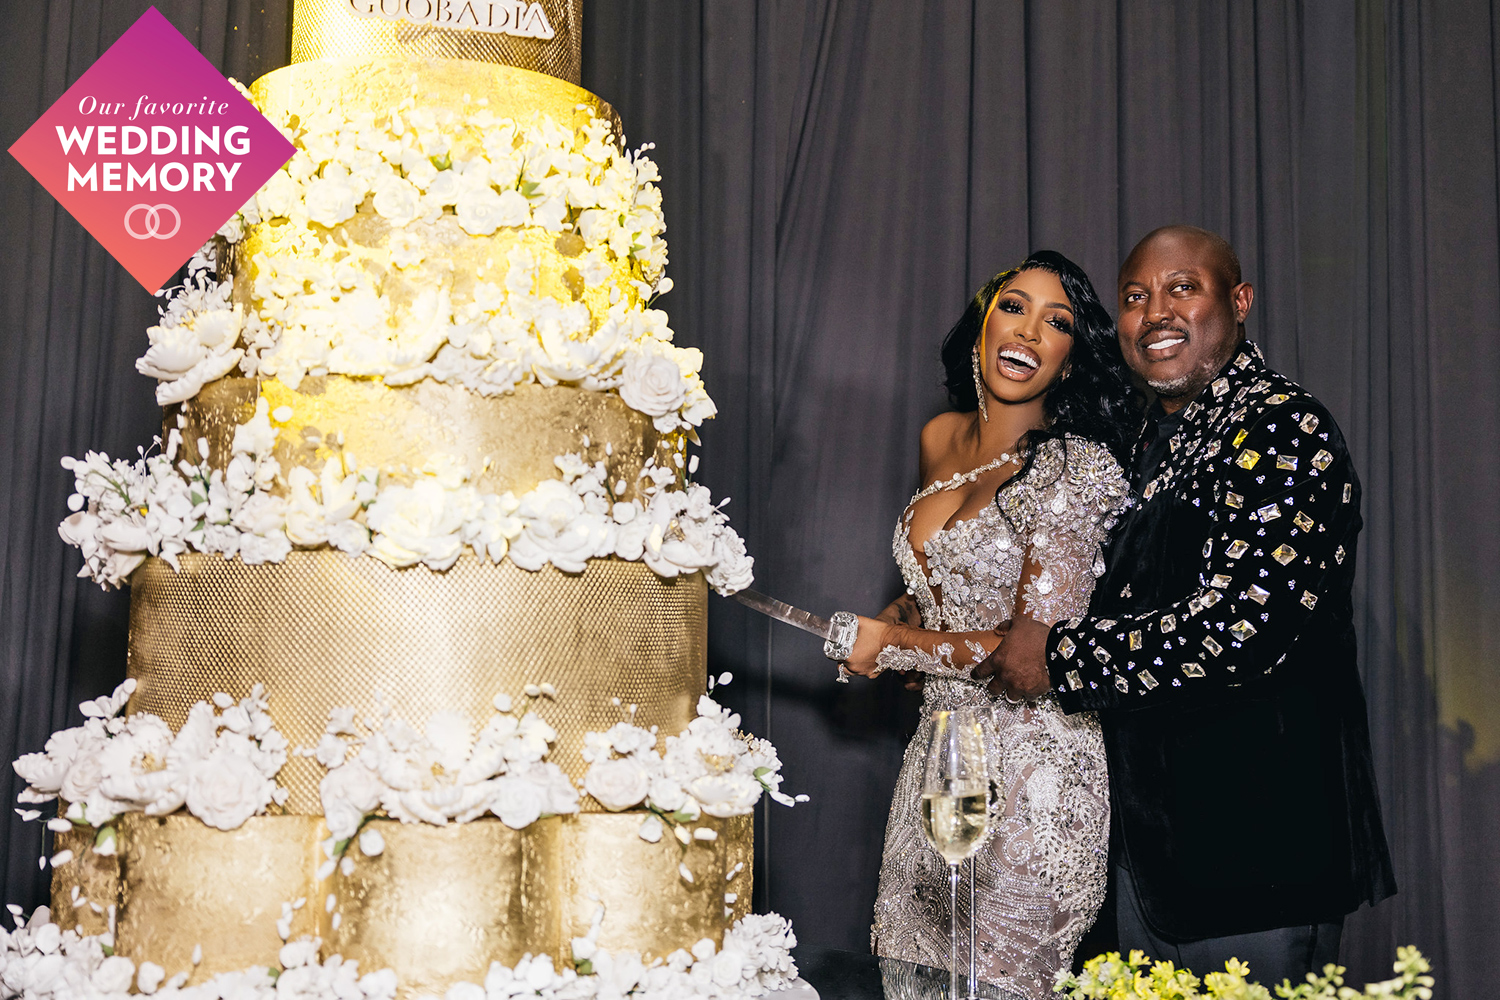 Porsha Williams Needed a Sword to Cut into Her 10-Ft. Cake with Husband Simon Guobadia. Credit: STANLOPHOTOGRAPHY